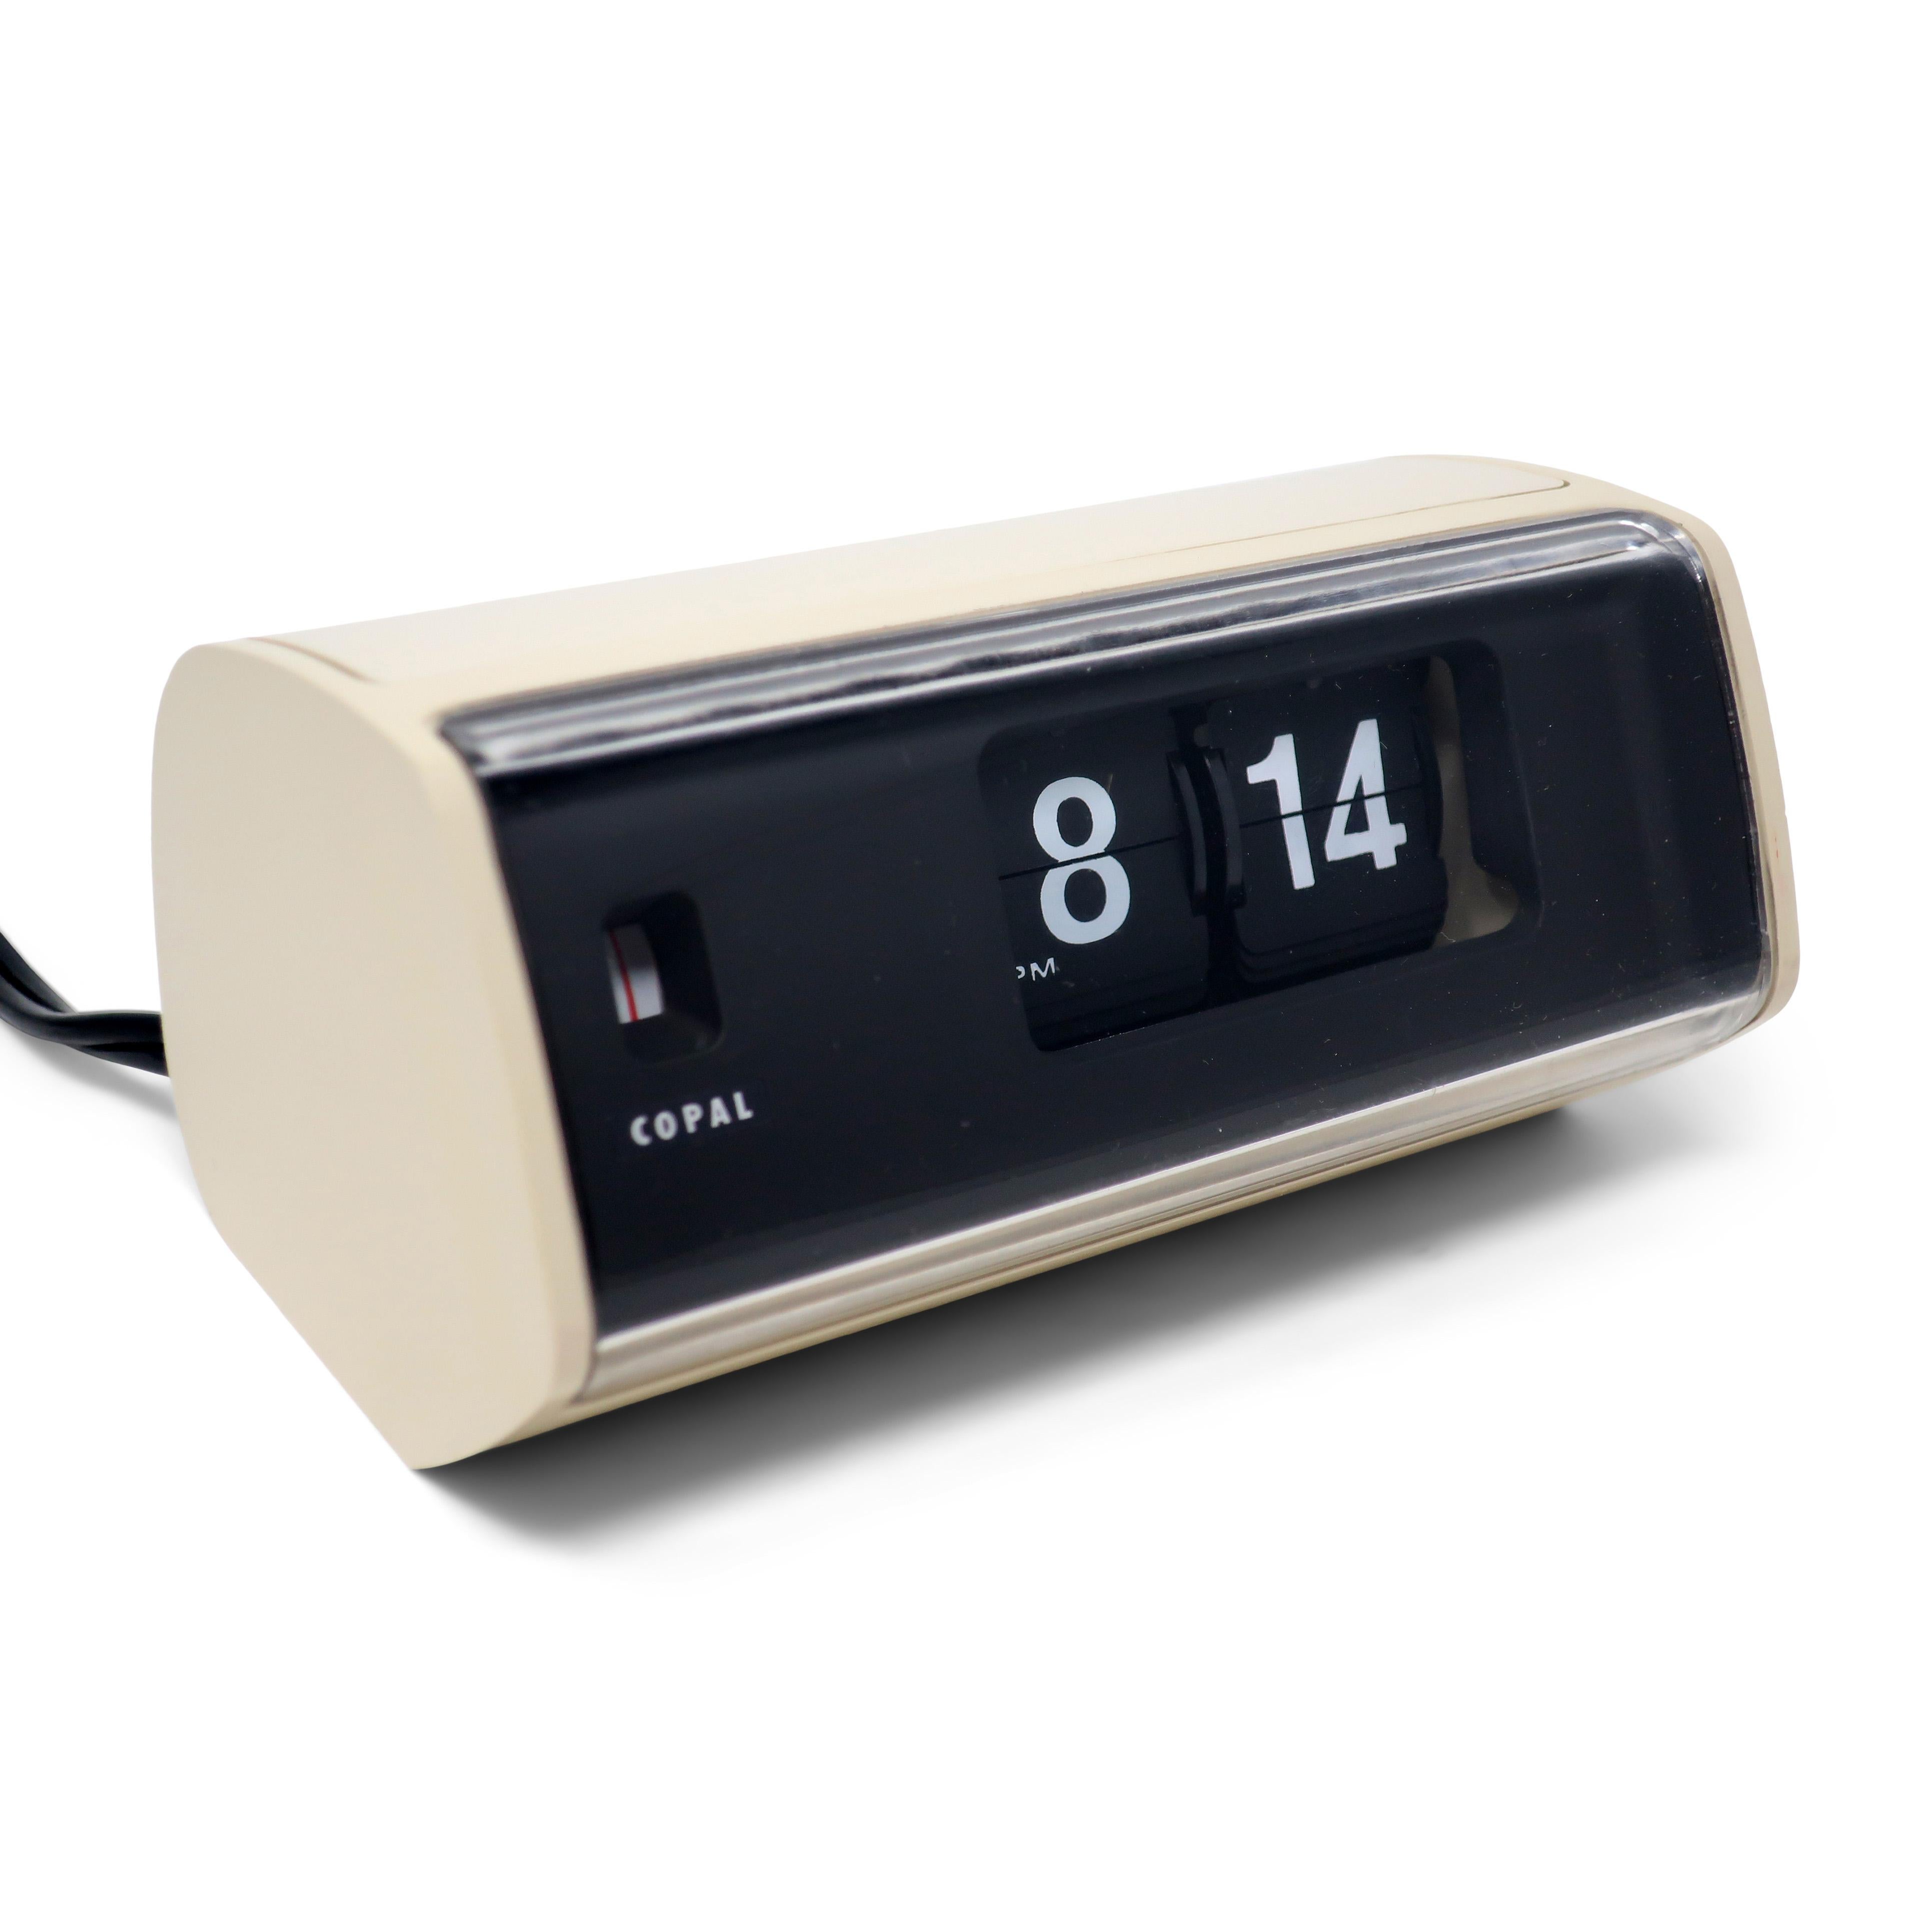 A beautiful Mid-Century Modern Copal Model 222 flip clock with white plastic case, black face, and clear plastic front. Minutes and hours flip as time passes, providing a satisfying quiet sound. Looks fantastic and works great!

In very good